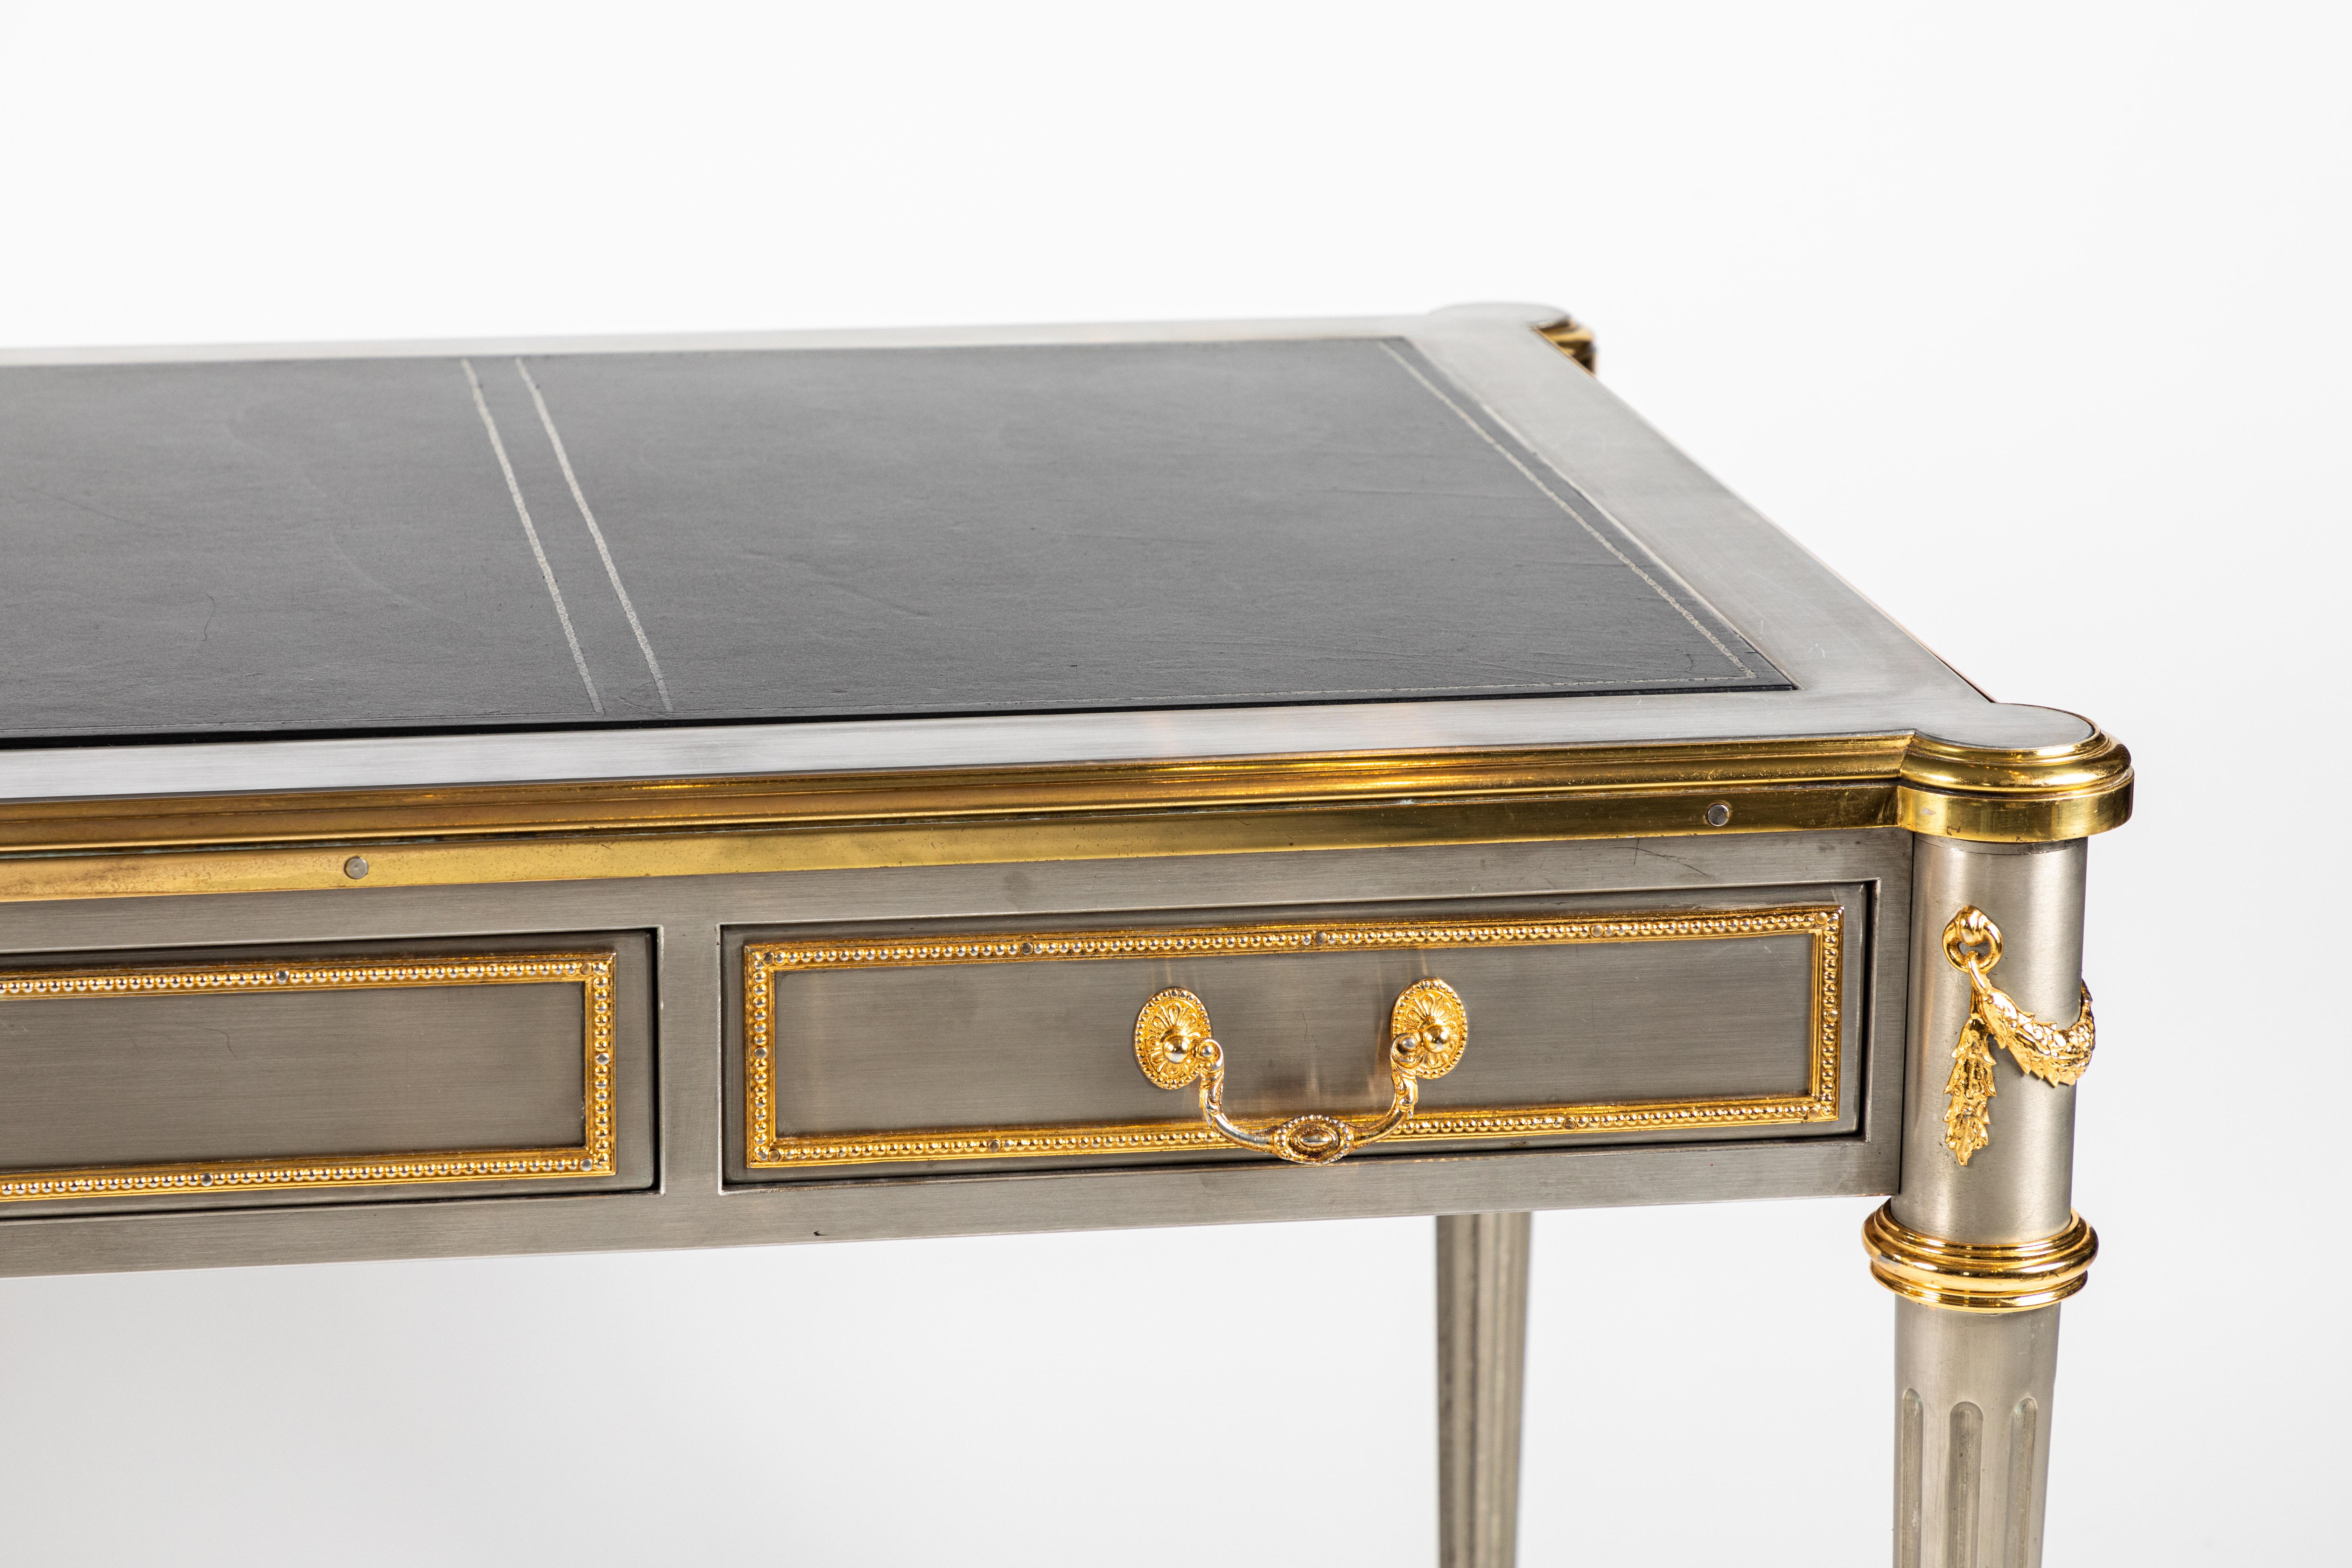 An absolutely fantastic steel desk by John Vesey with bronze doré mounts, and original gold embossed leather top. The desk has three drawers across the front on one side with a key lock on the center drawer including key. This desk came from the